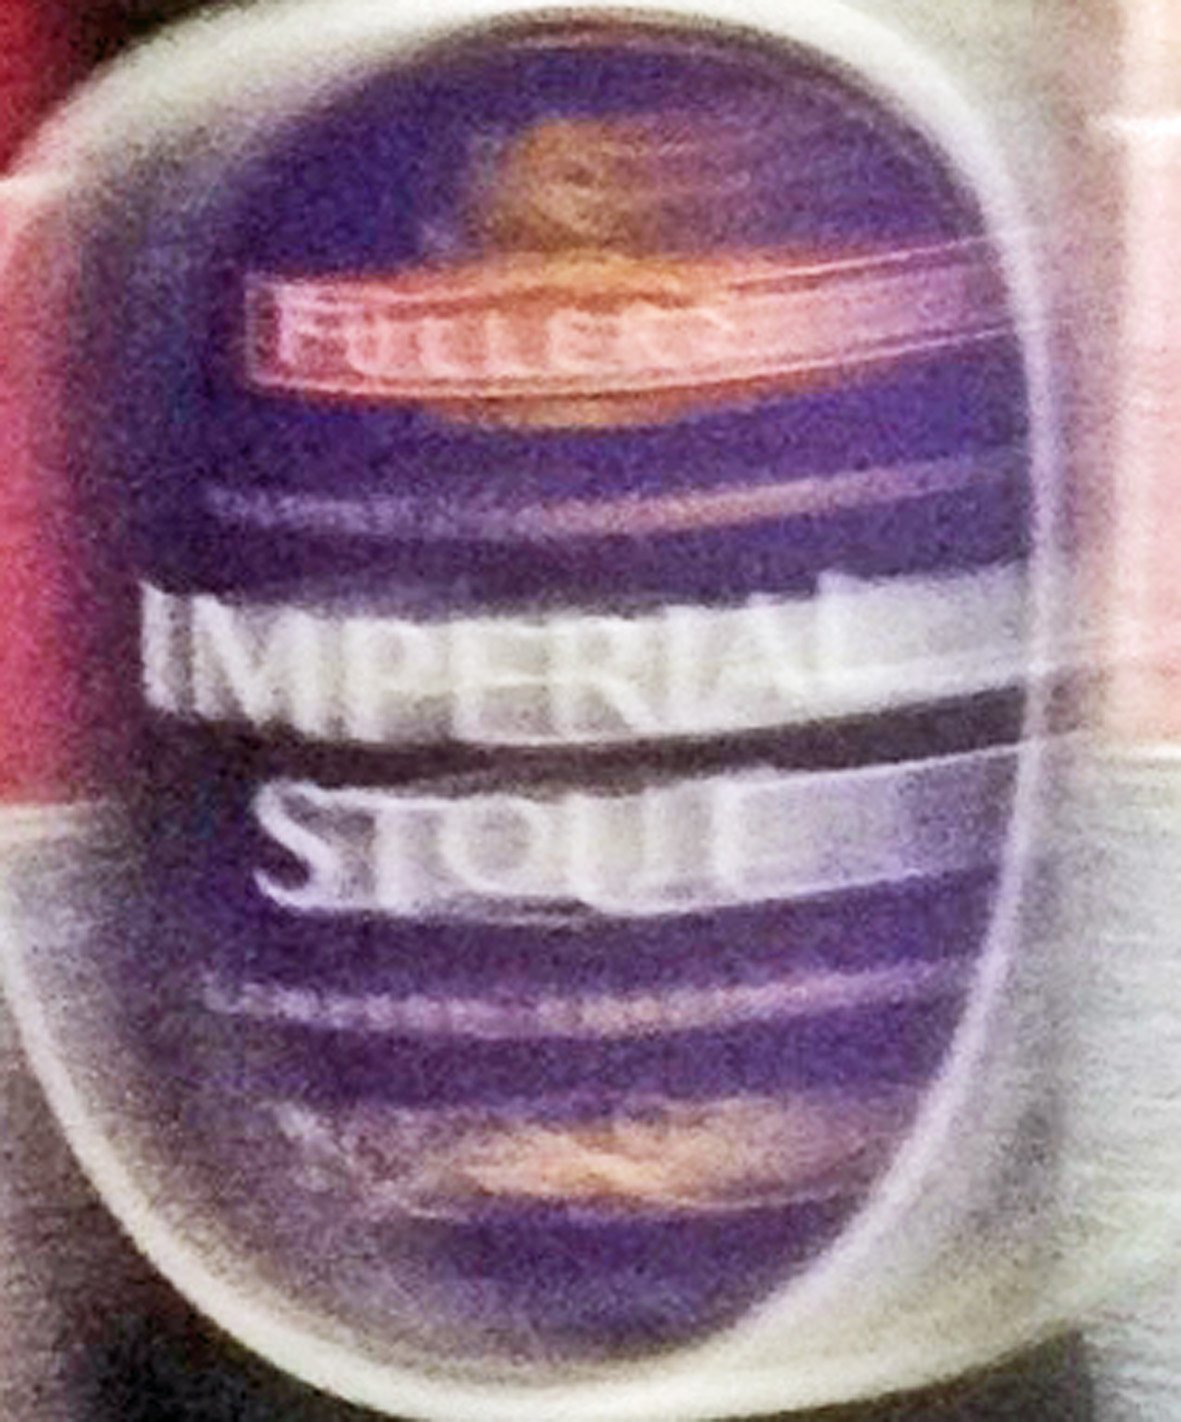 Imperial stout blurred